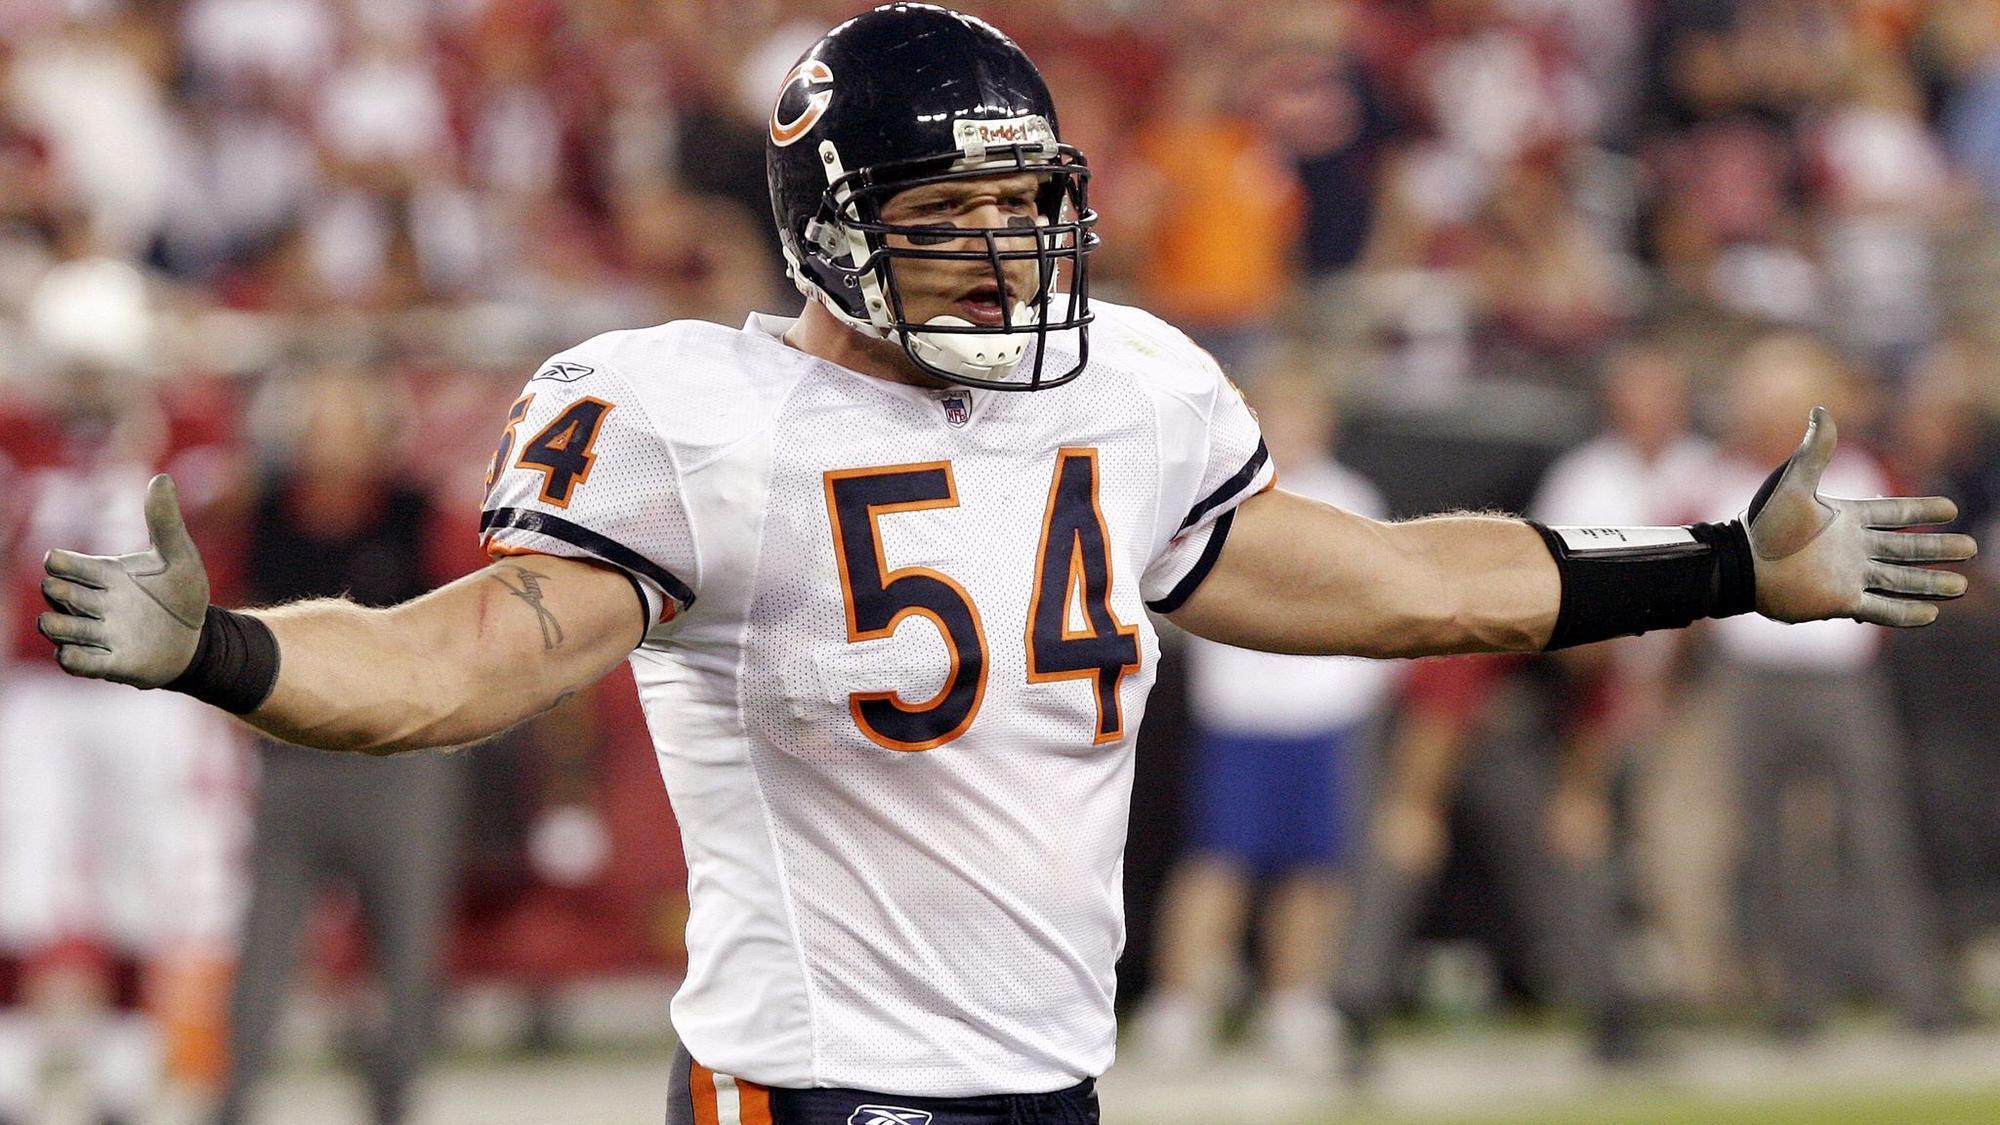 Brian Urlacher named semifinalist for Pro Football Hall of Fame - Chicago Tribune2000 x 1125